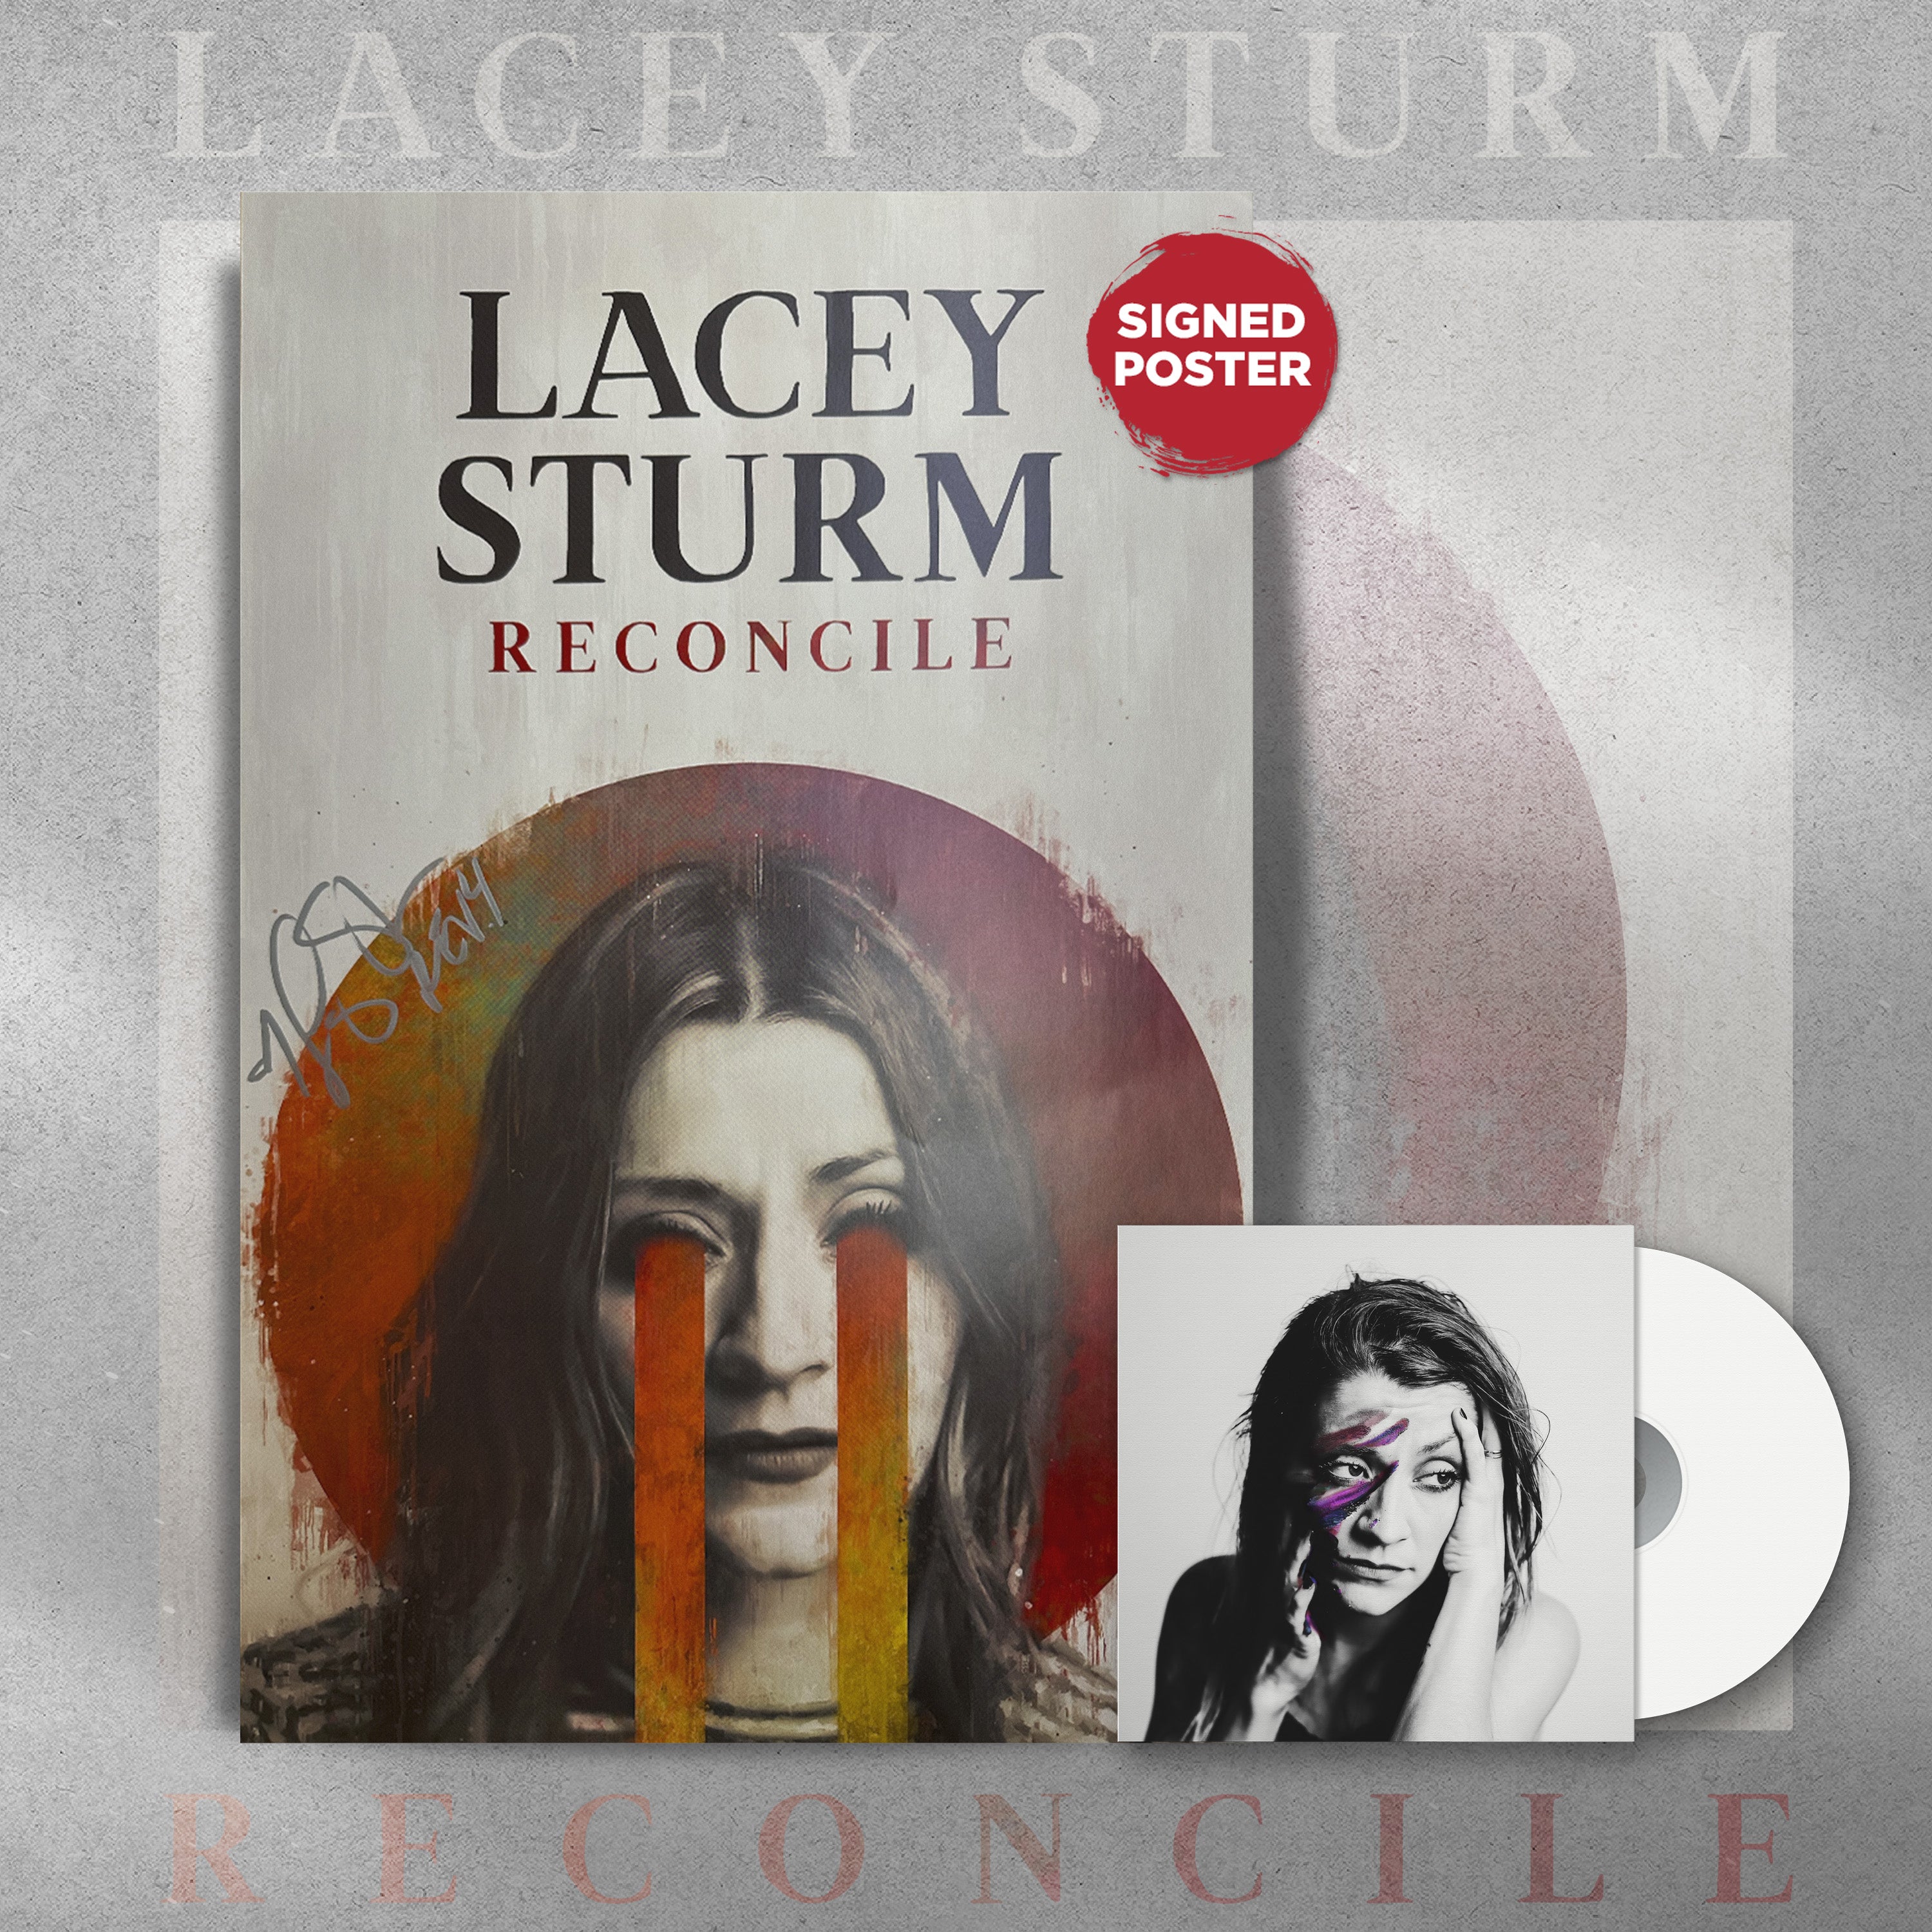 LACEY STURM - KENOTIC METANOIA CD & RECONCILE SIGNED POSTER – LaceySturm